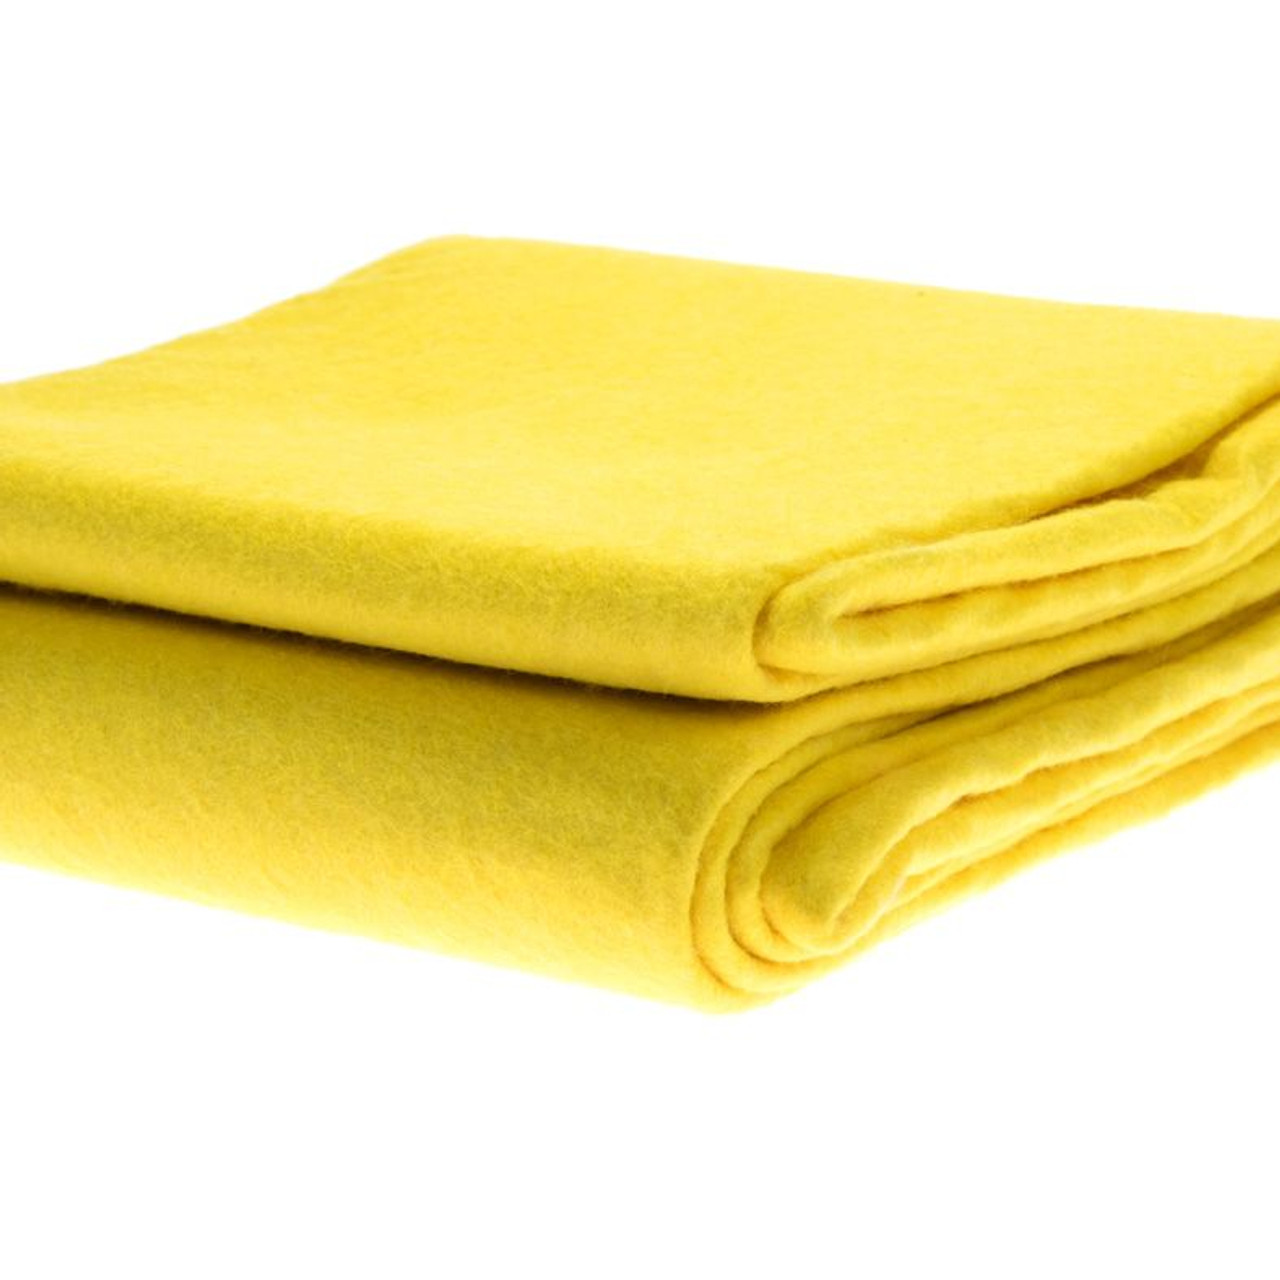 27 x 50 Camp Towel - Yellow, Non Woven, Super Absorbent Material -  Camping Tools Supplies